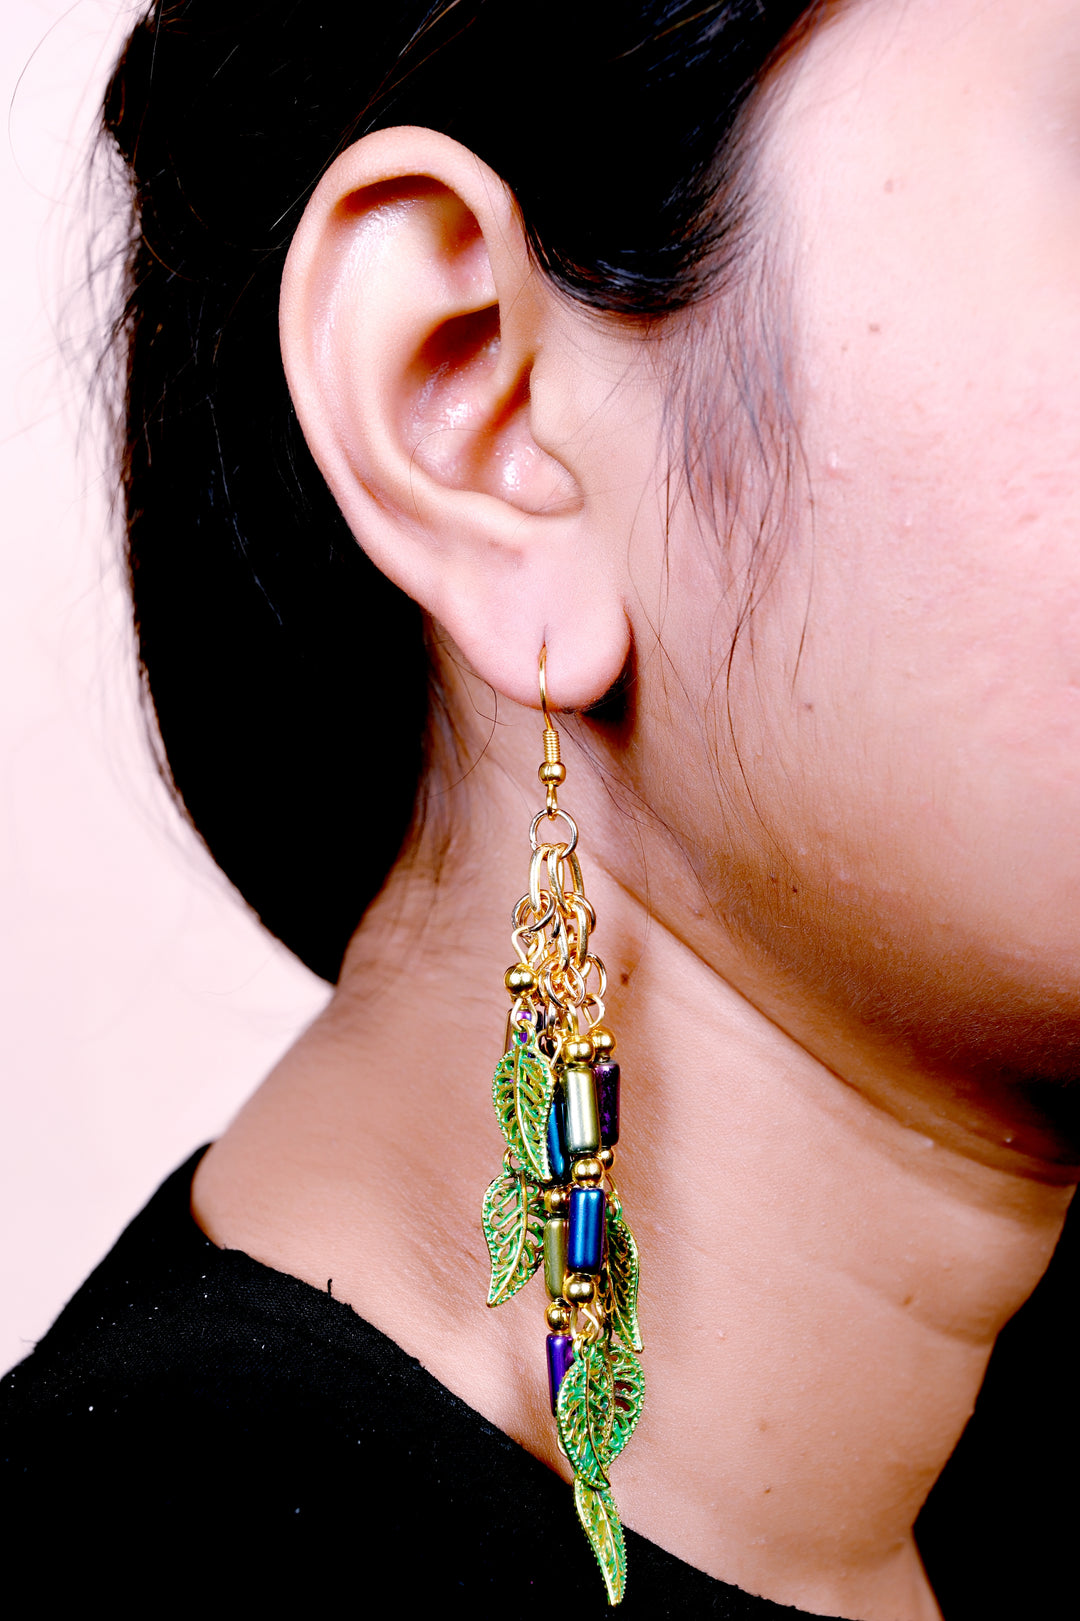 Multi Layered Metal Chain Earring Styled With Leaf Shaped Metal Charms